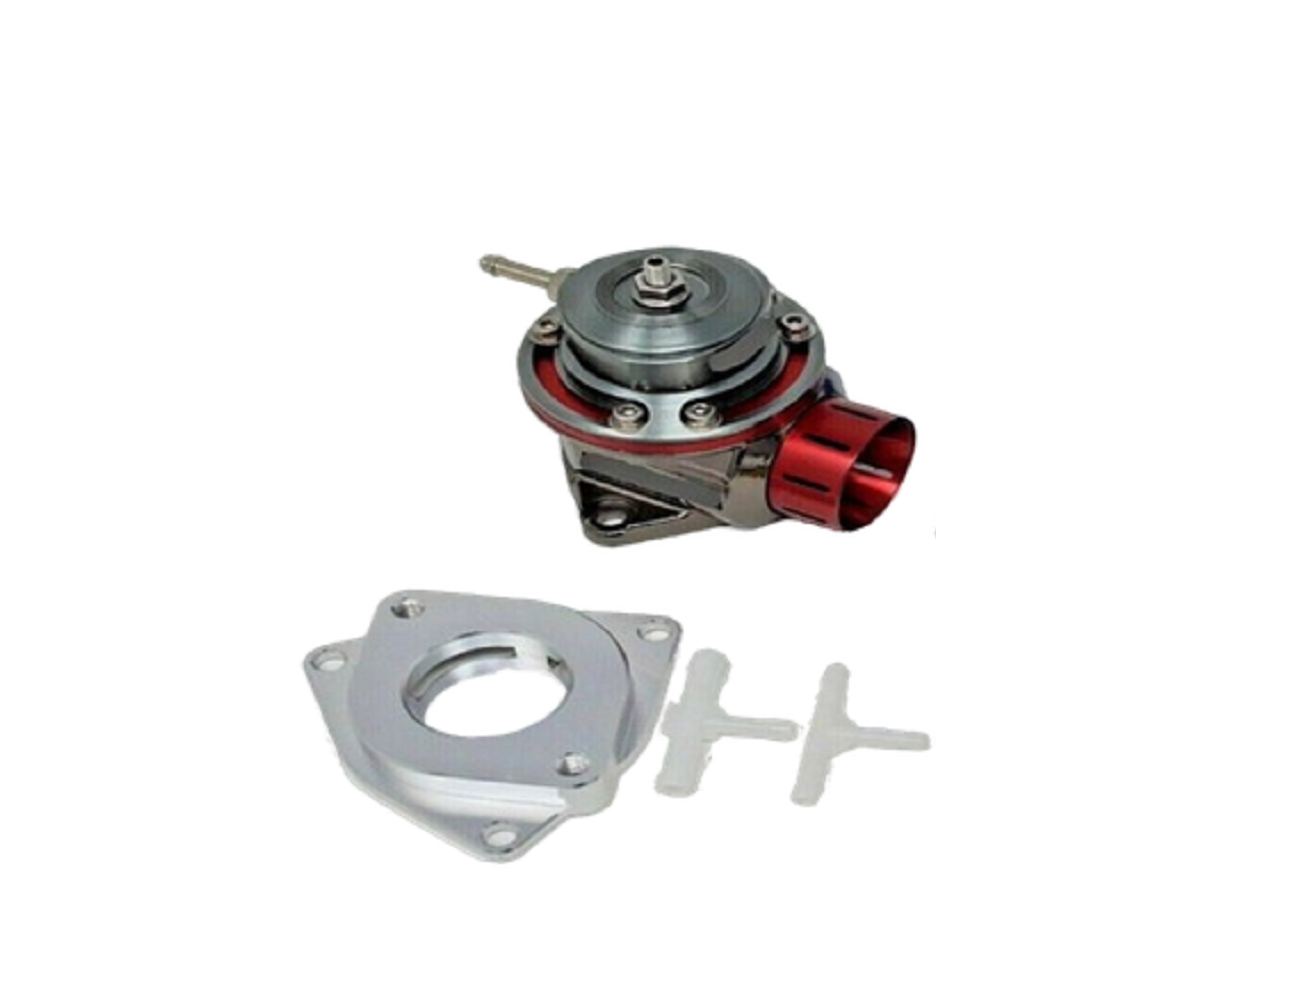 Type FV Blow Off Valve BOV For Hyundai Veloster 1.6T With Adapter Flange